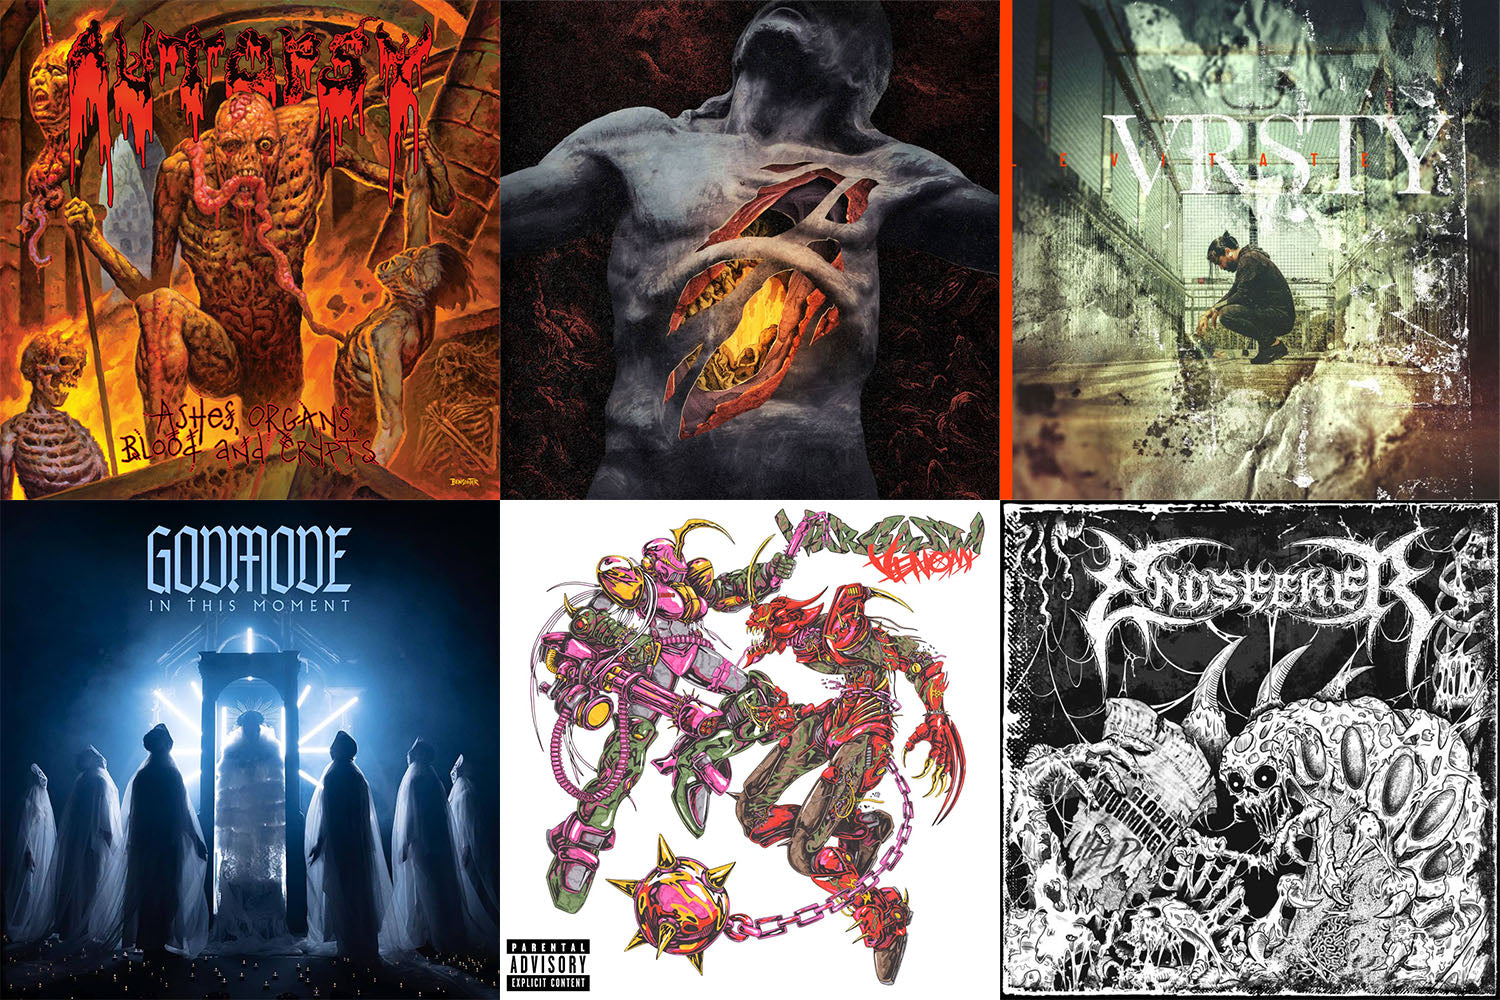 New Flesh 10/27: Releases From In This Moment, Endseeker, Wargasm